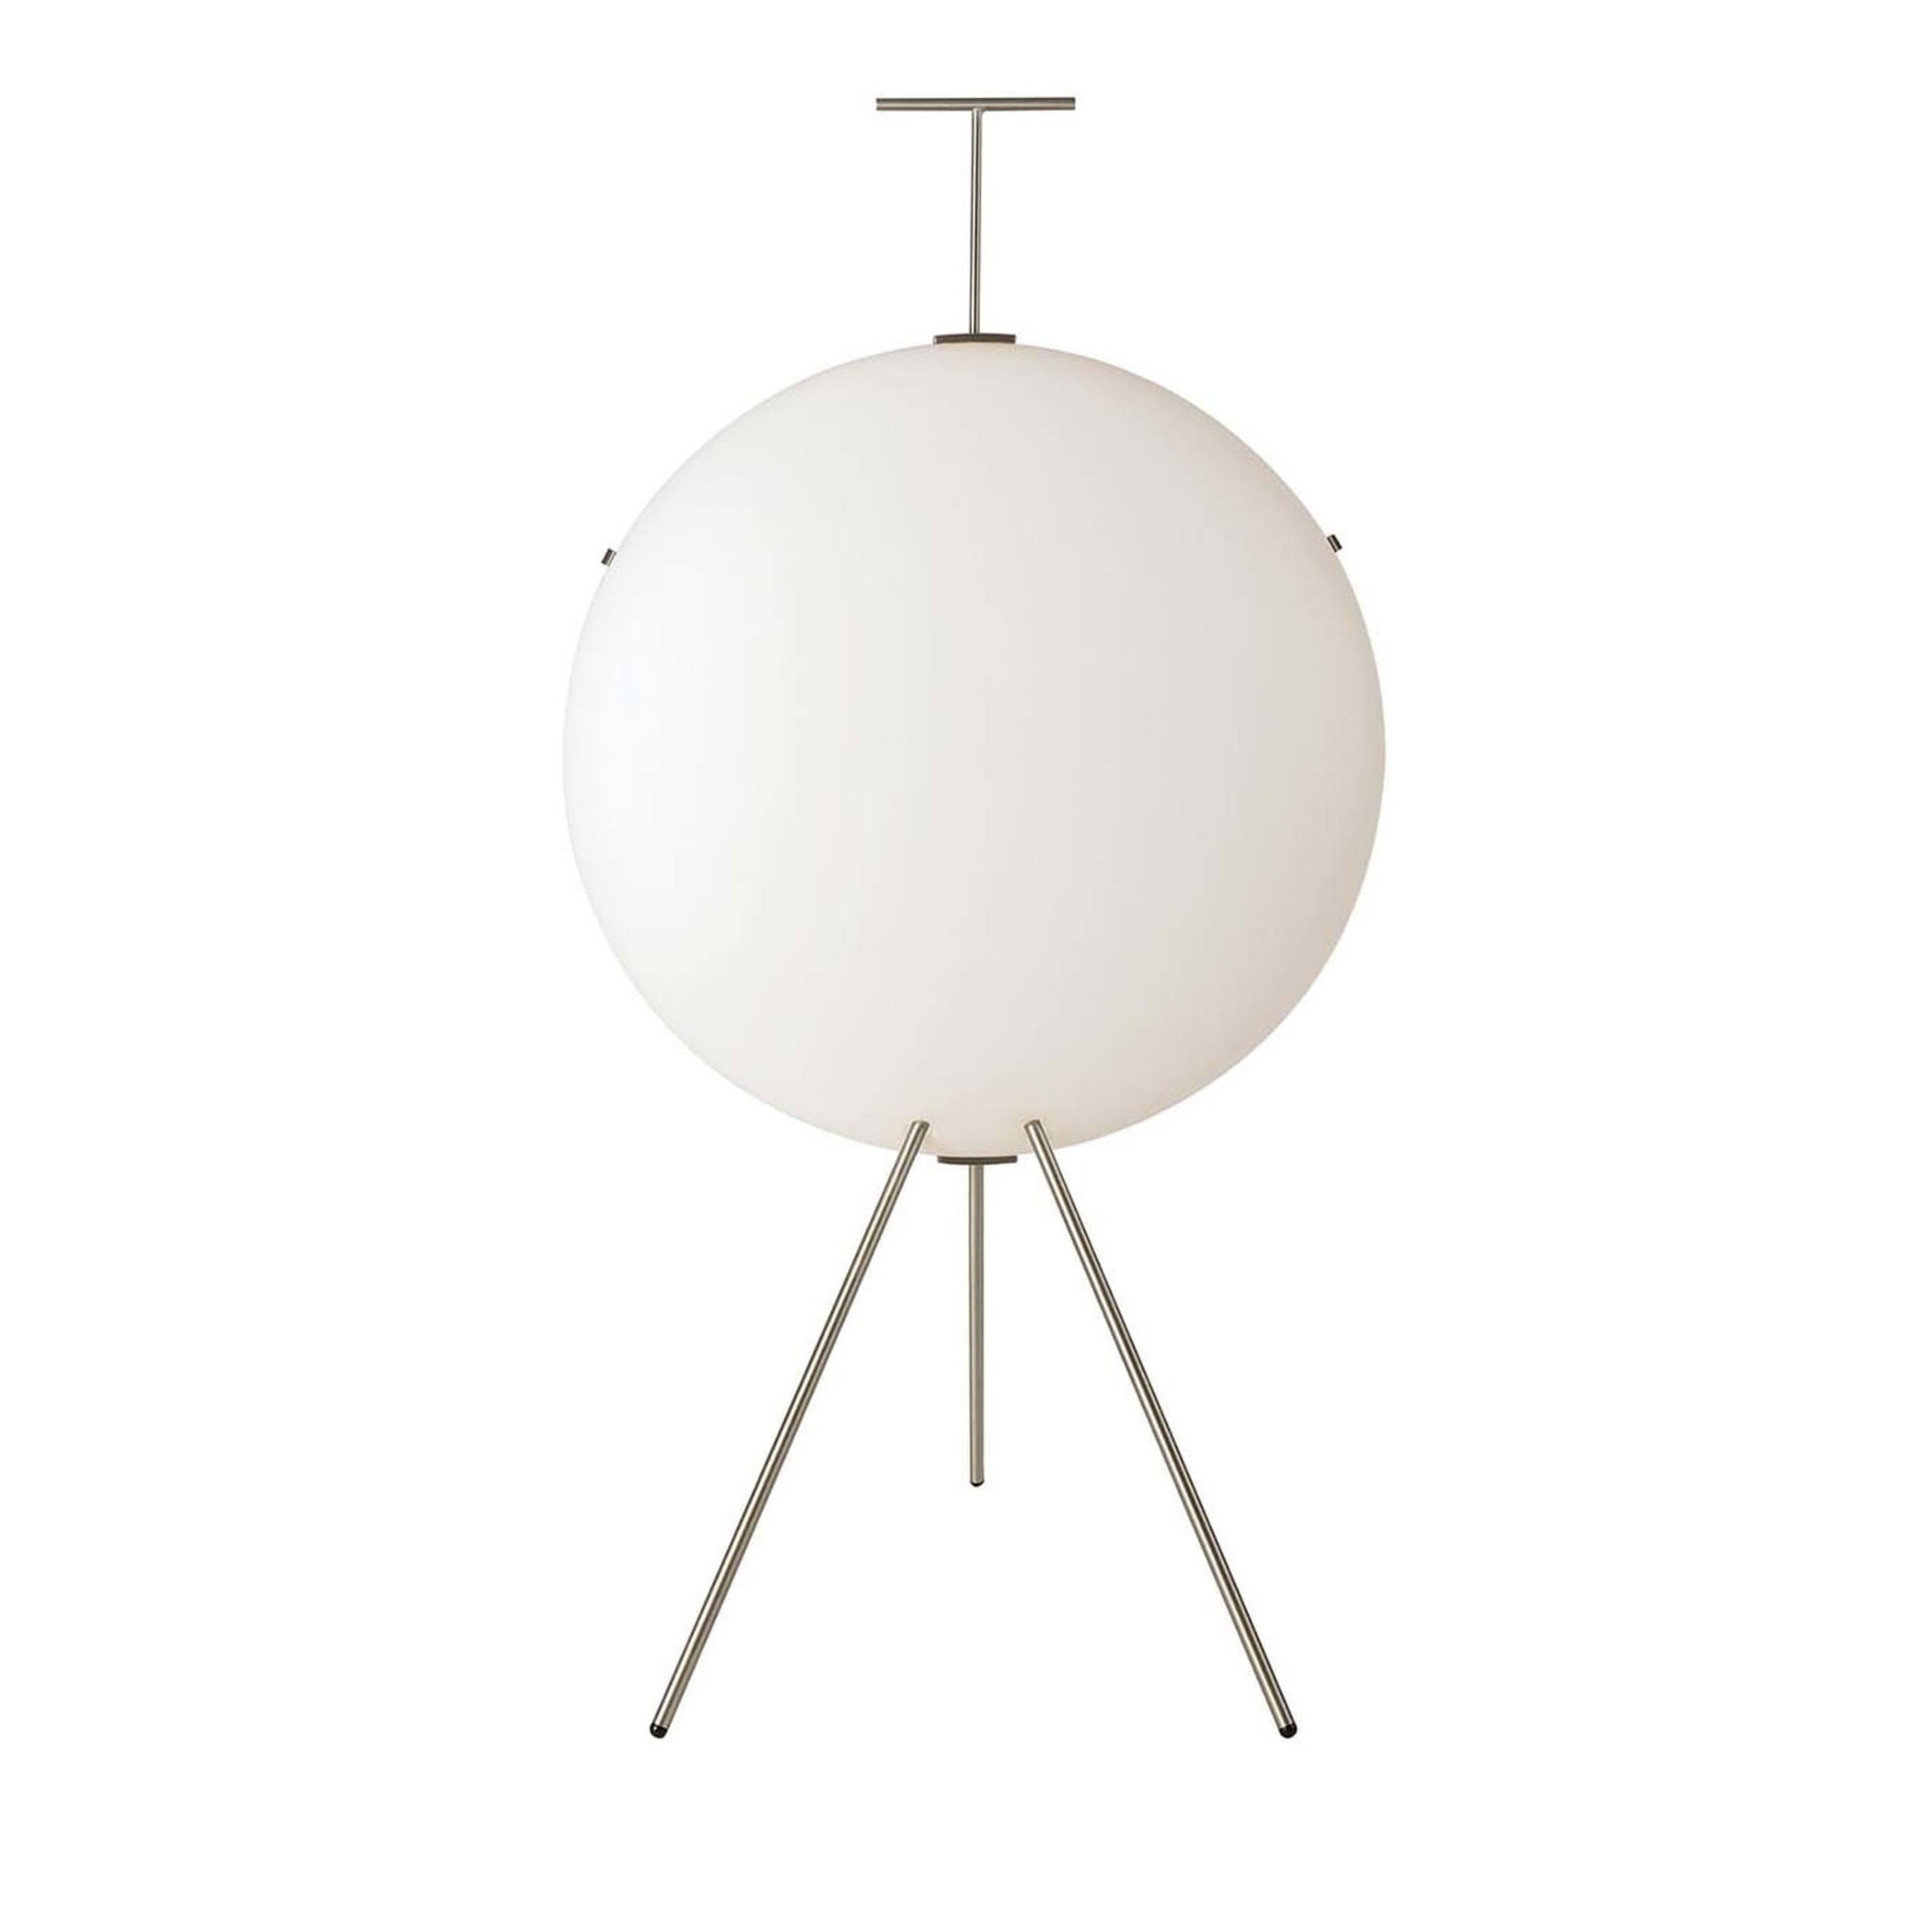 Luna Verticale Floor Lamp 1 by Gio Ponti - Main view